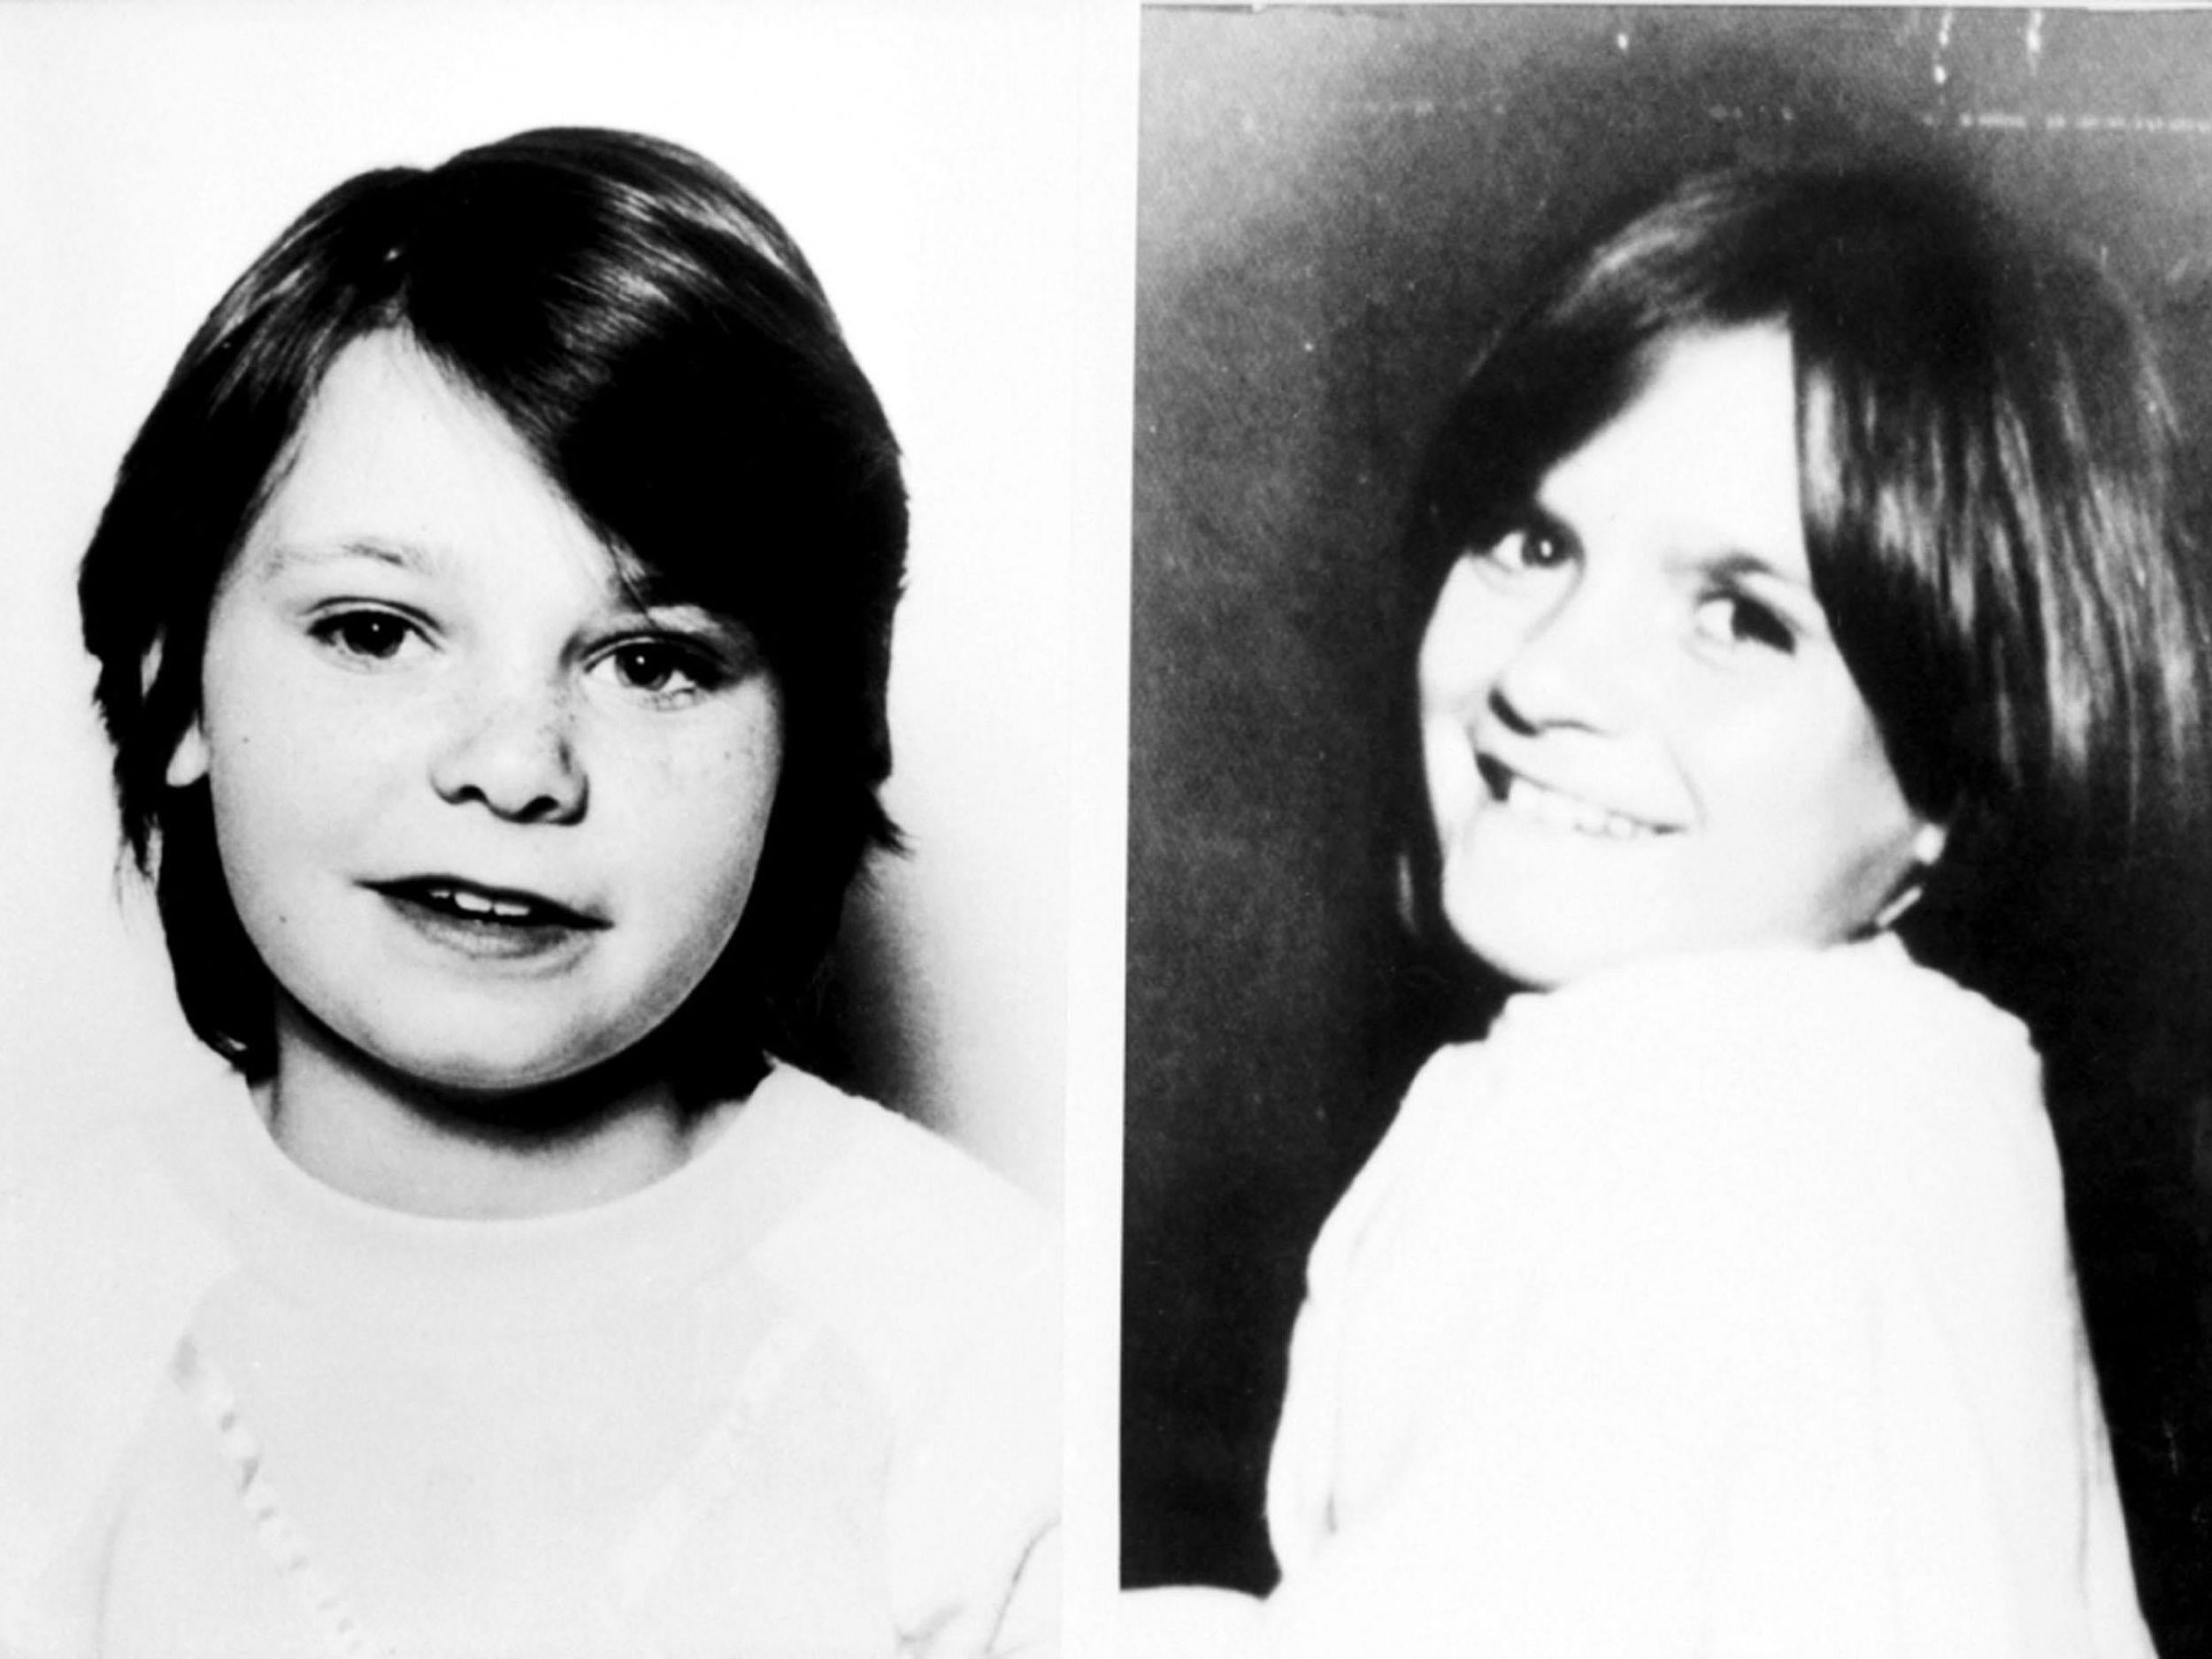 Karen Hadaway (left) and Nicola Fellows were murdered in a Brighton park on October 9 1986